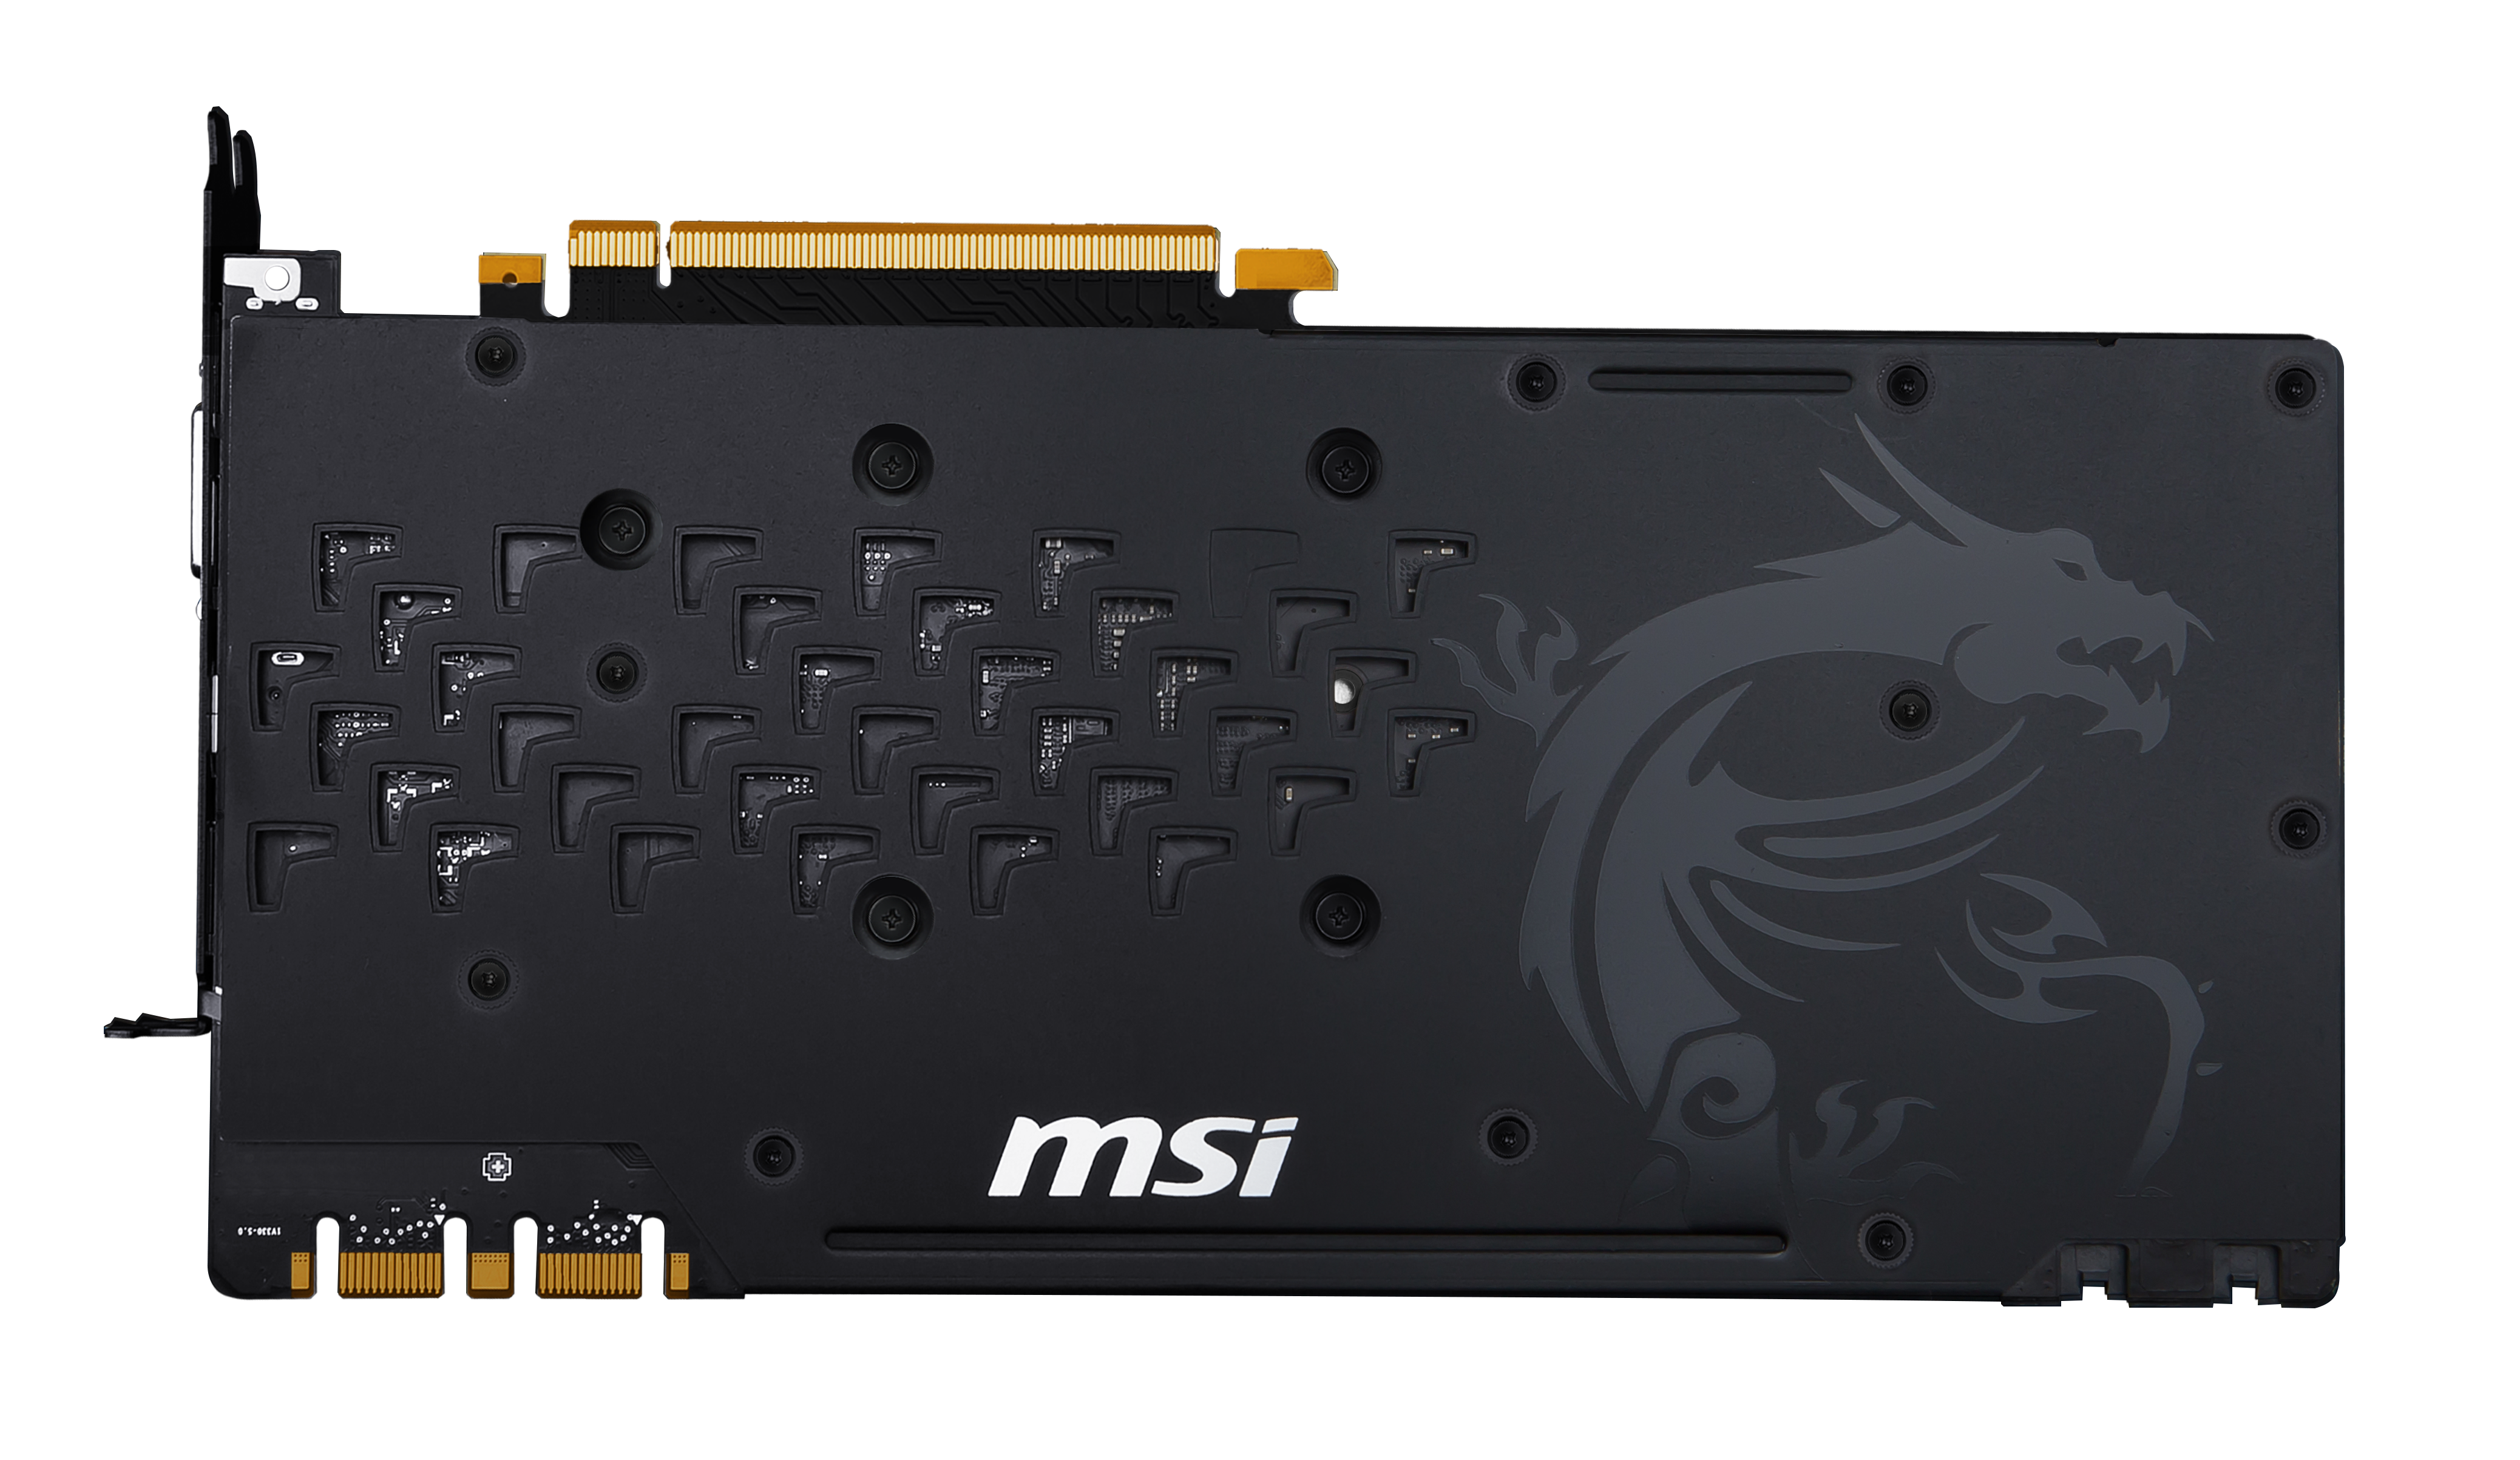 Specs Msi Geforce Gtx 1080 Gaming X 8gb Graphics Cards V336 001r